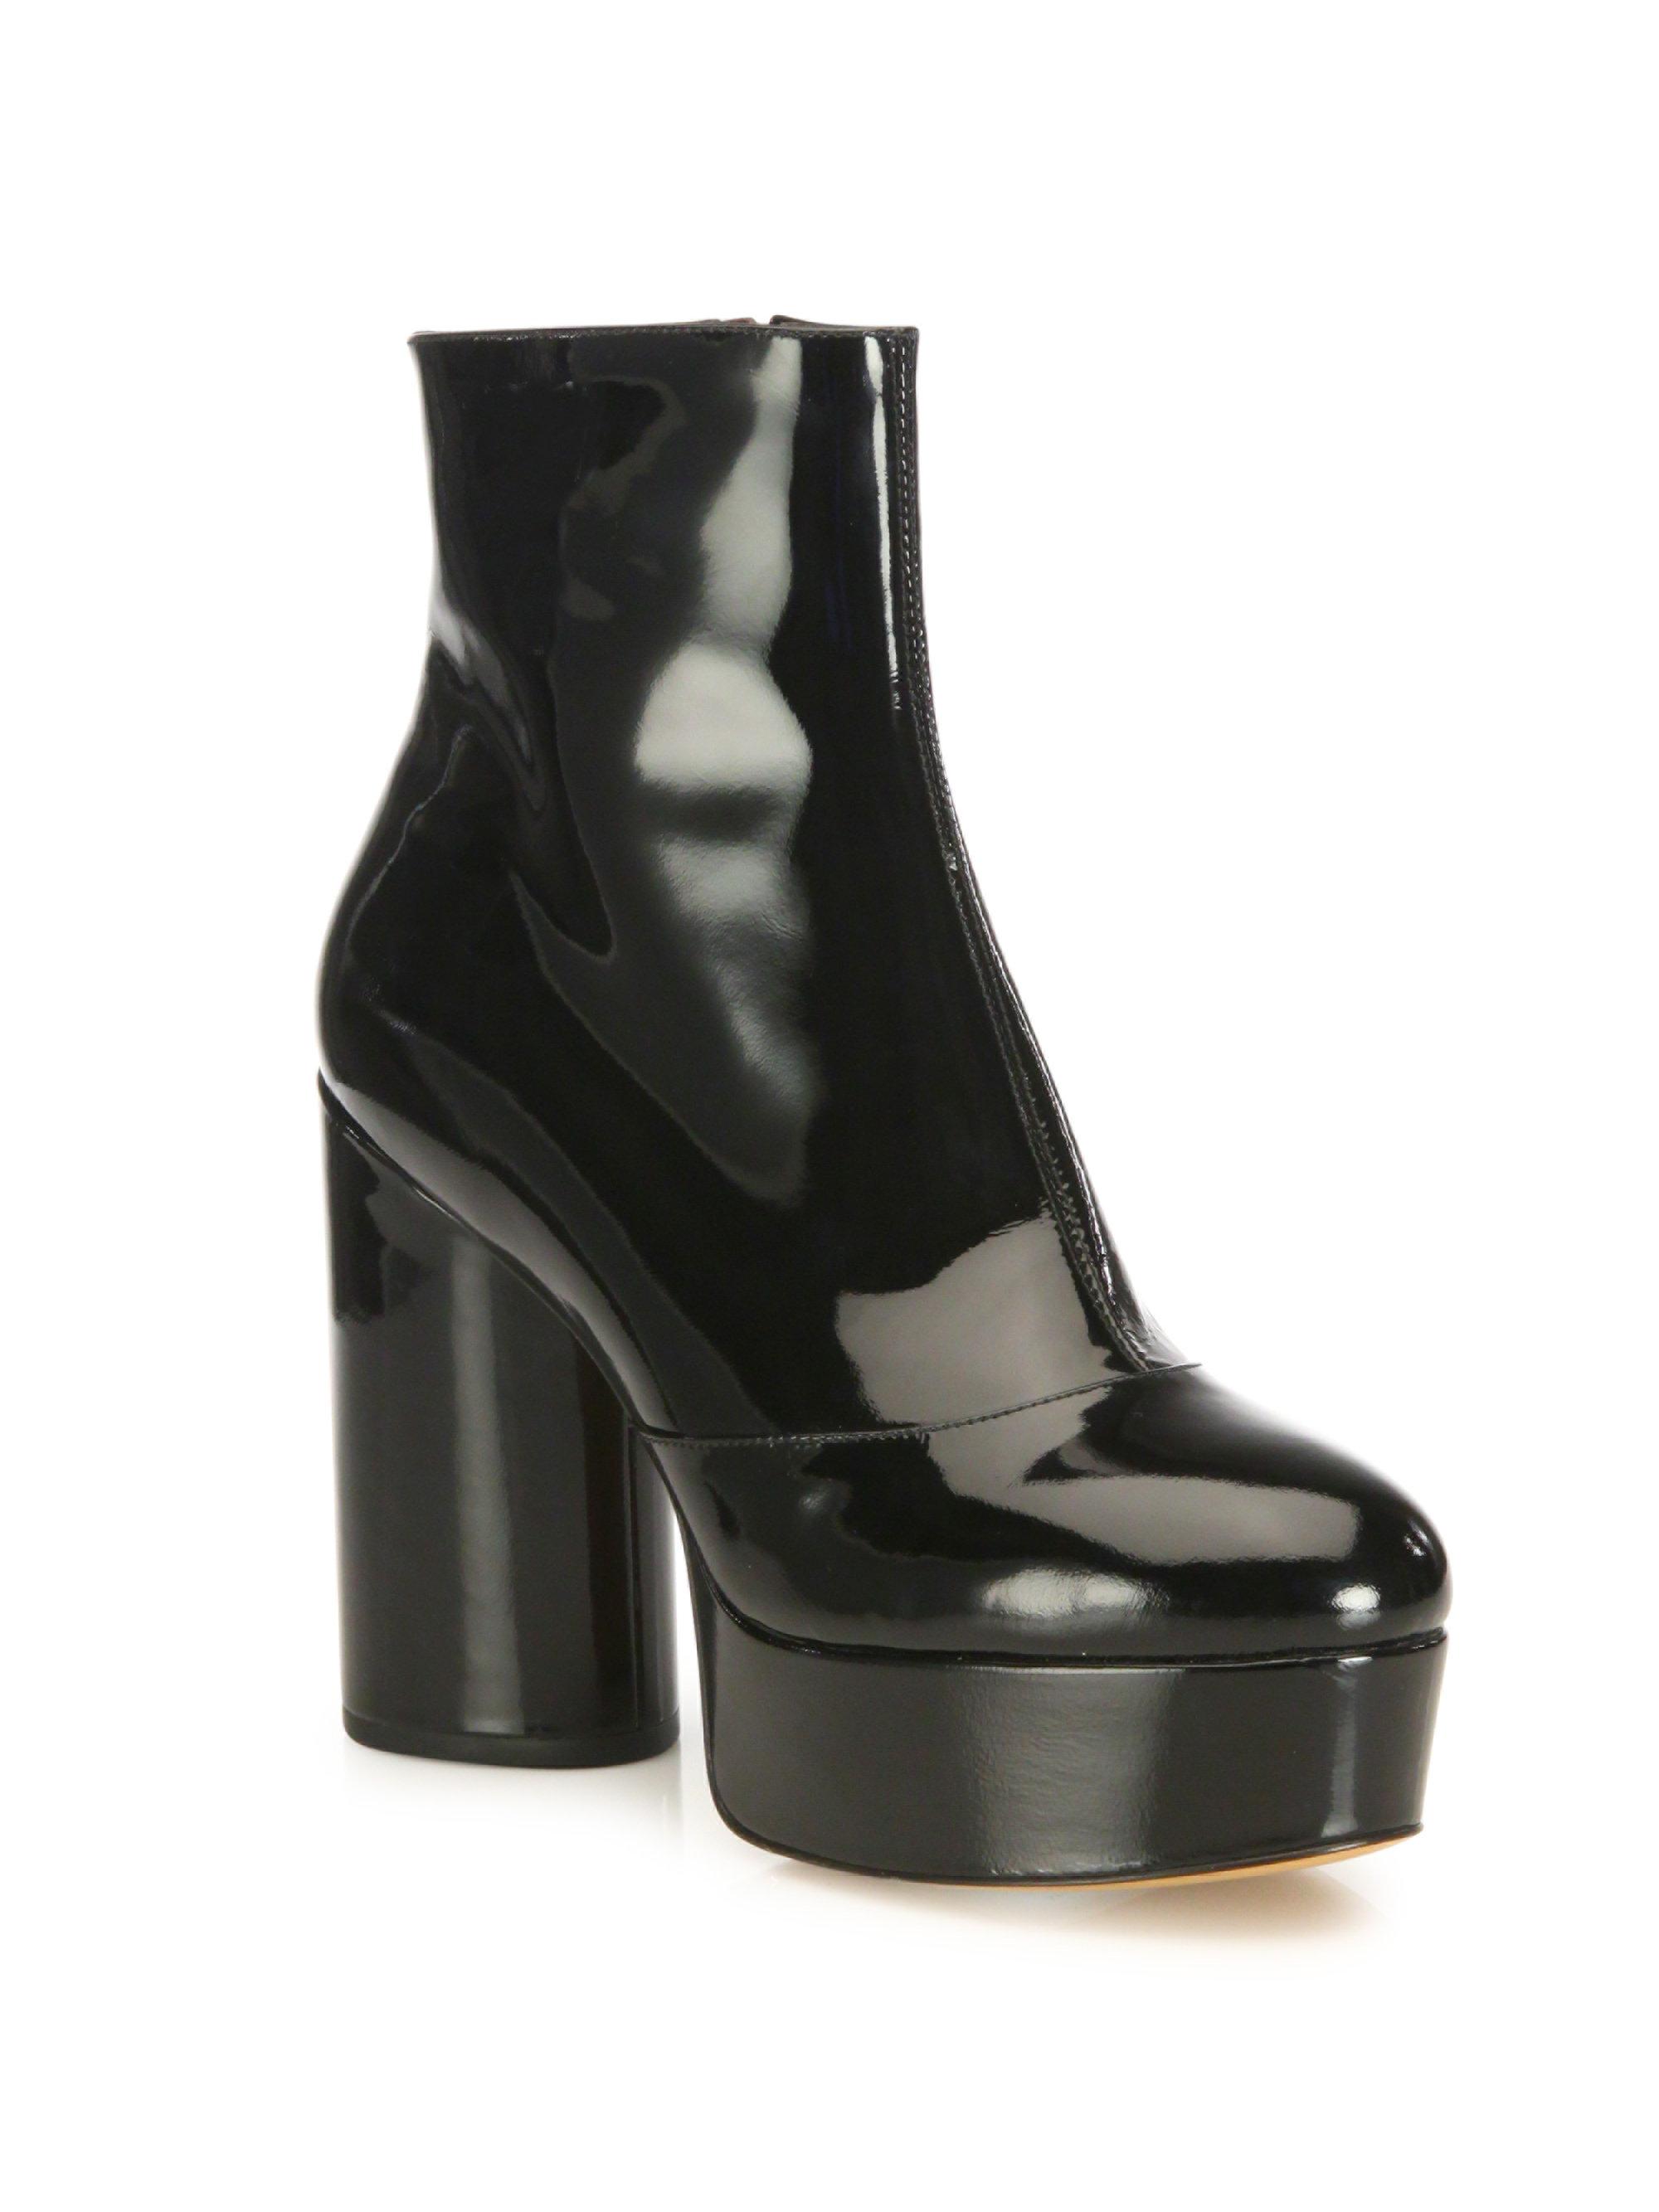 Marc Jacobs Amber Patent Leather Platform Boots in Black | Lyst